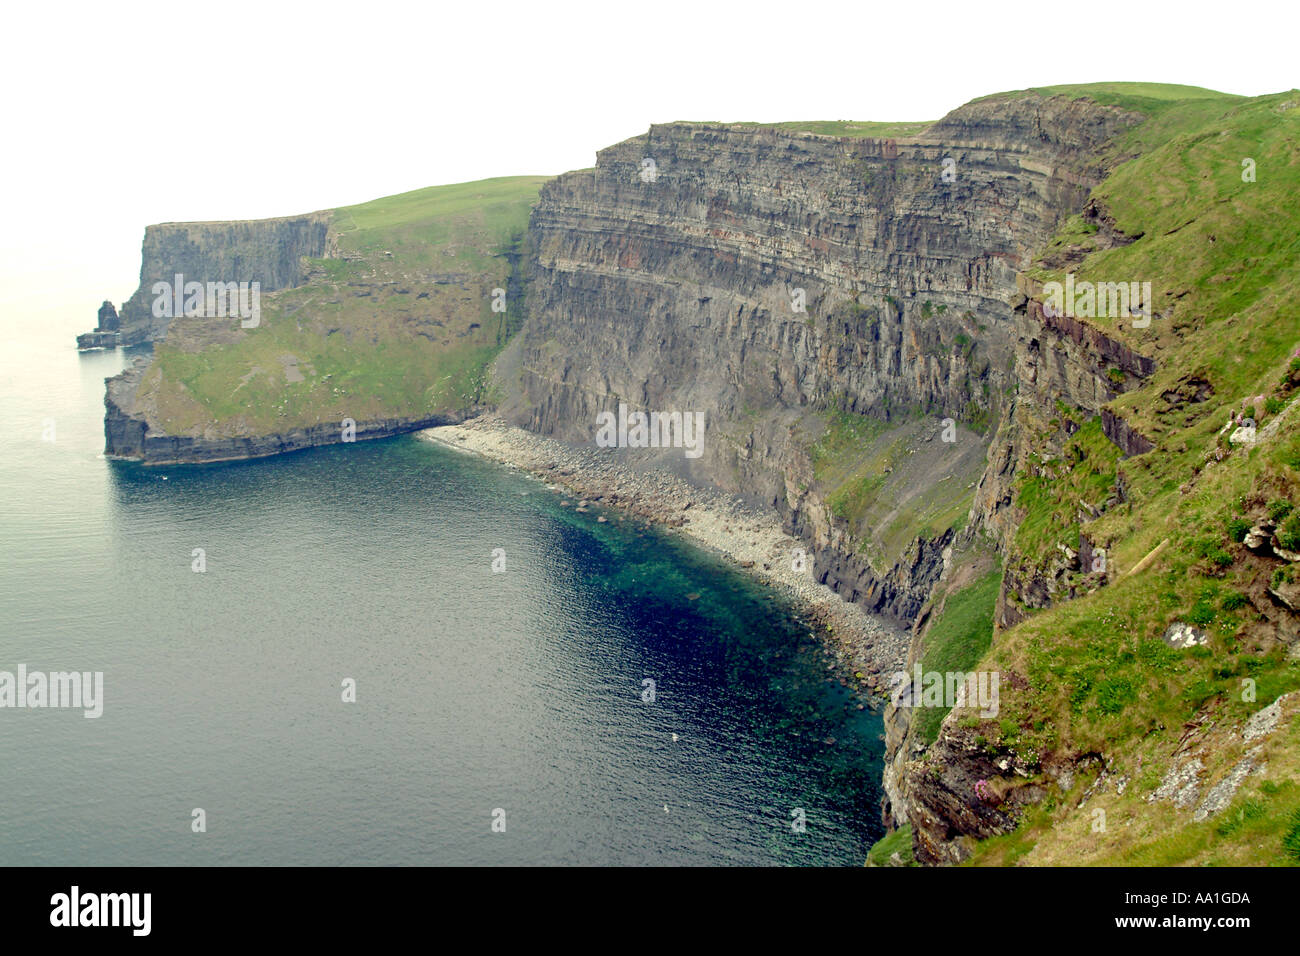 Cliffs of Moher (also known as the Cliffs of Mohair) in County Clare, Ireland. Stock Photo